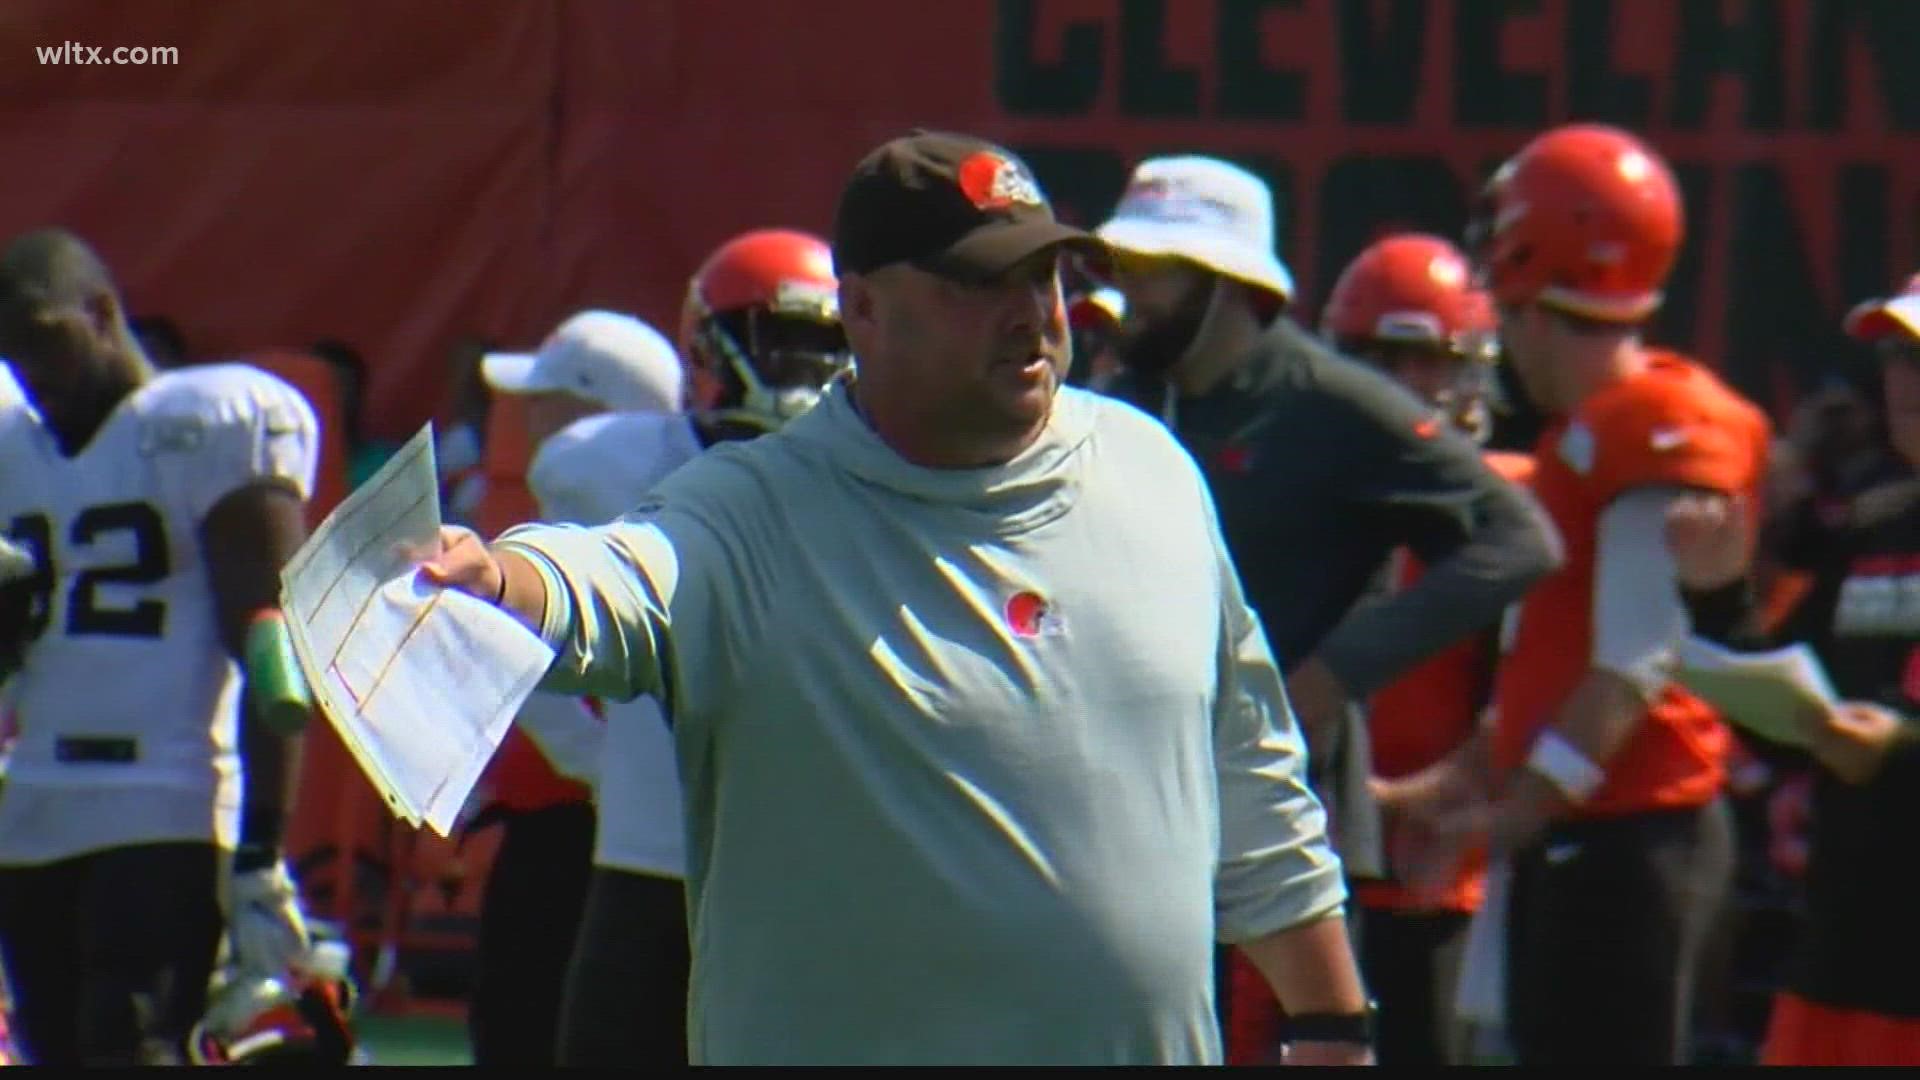 The South Carolina Gamecocks have hired former NFL coach Freddie Kitchens for a role with the football team.